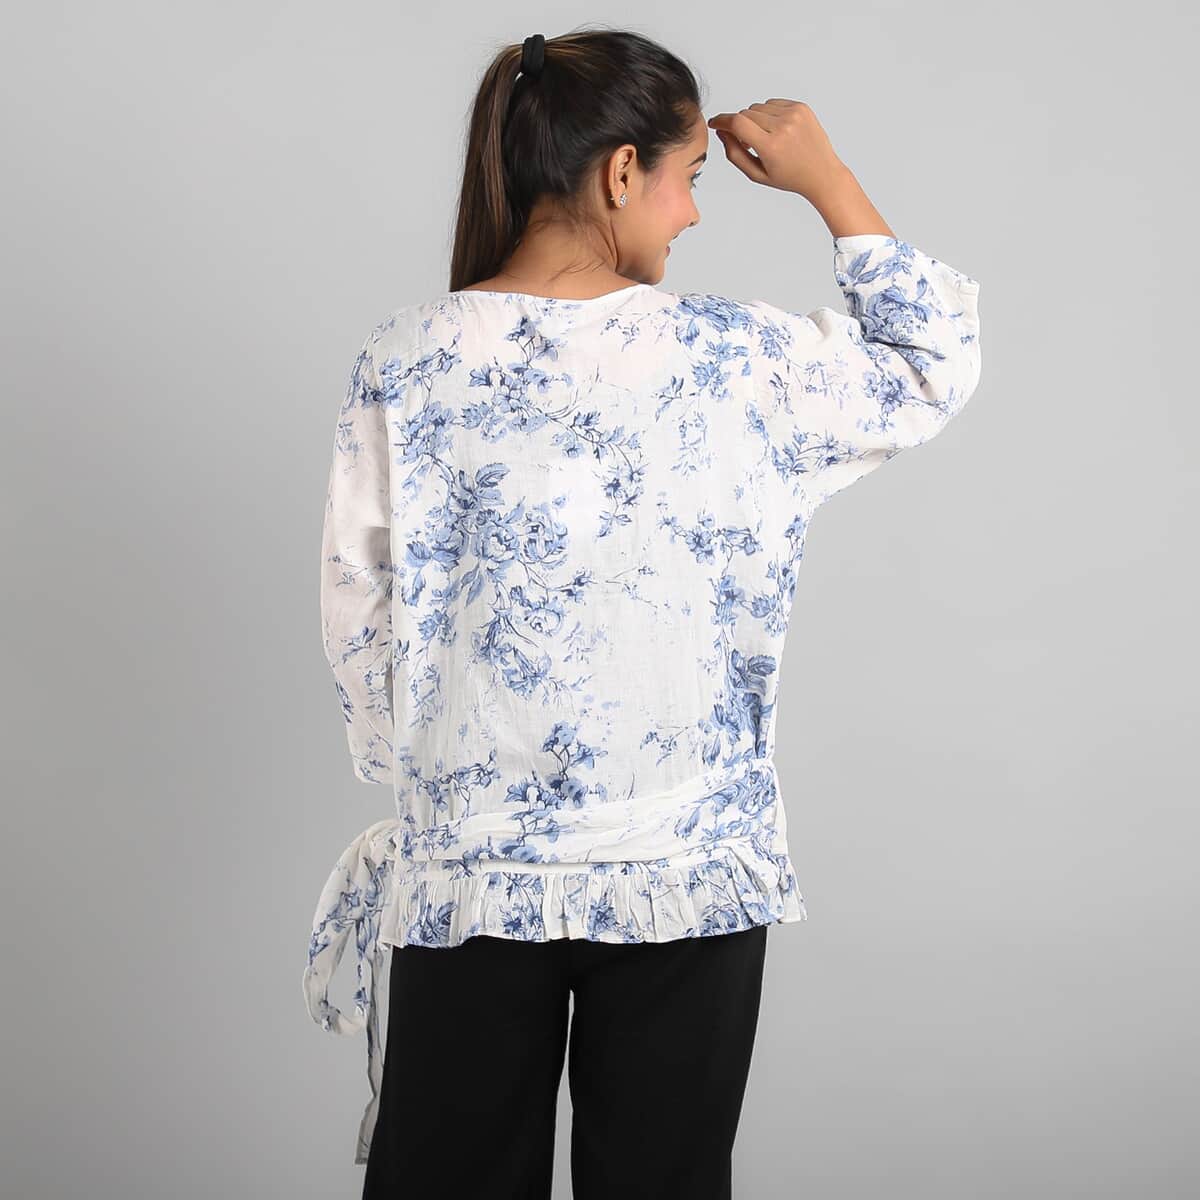 JOVIE Blue Floral Cotton Gauze Wrap Blouse with Frill Trim - One Size Missy (26.25"x23.5") image number 3